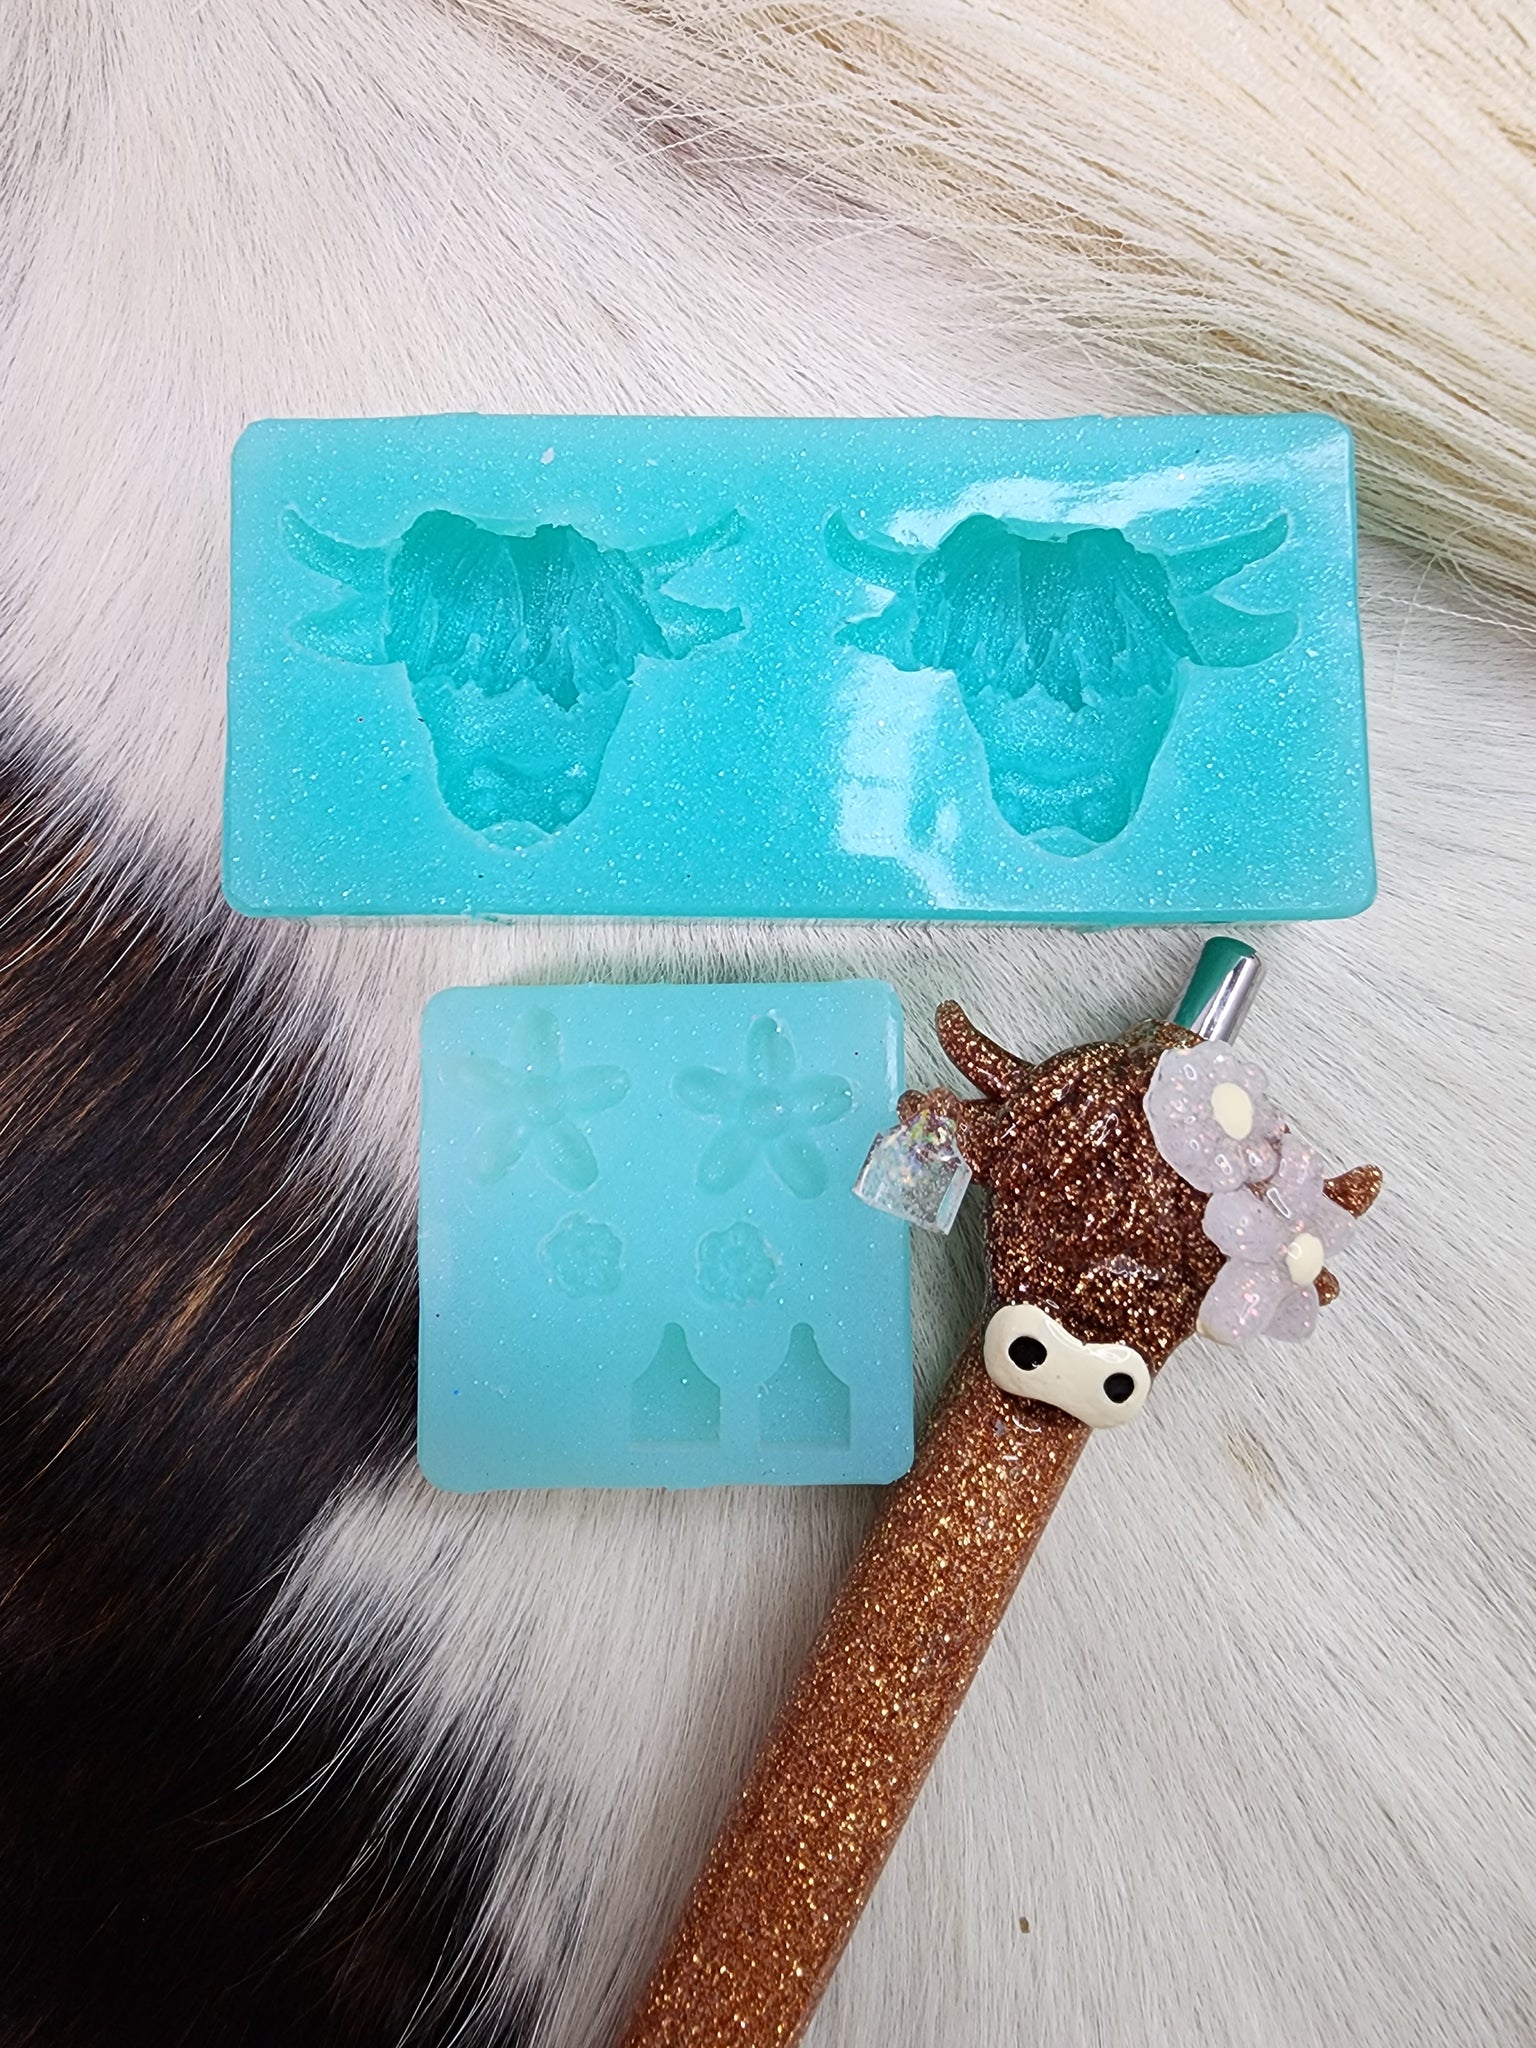 Highland cow Head & Flower with Ear Tag Resin - Epoxy Silicone Mold / Custom Made to Order / Wax Melts Mold / Freshie Vent Molds